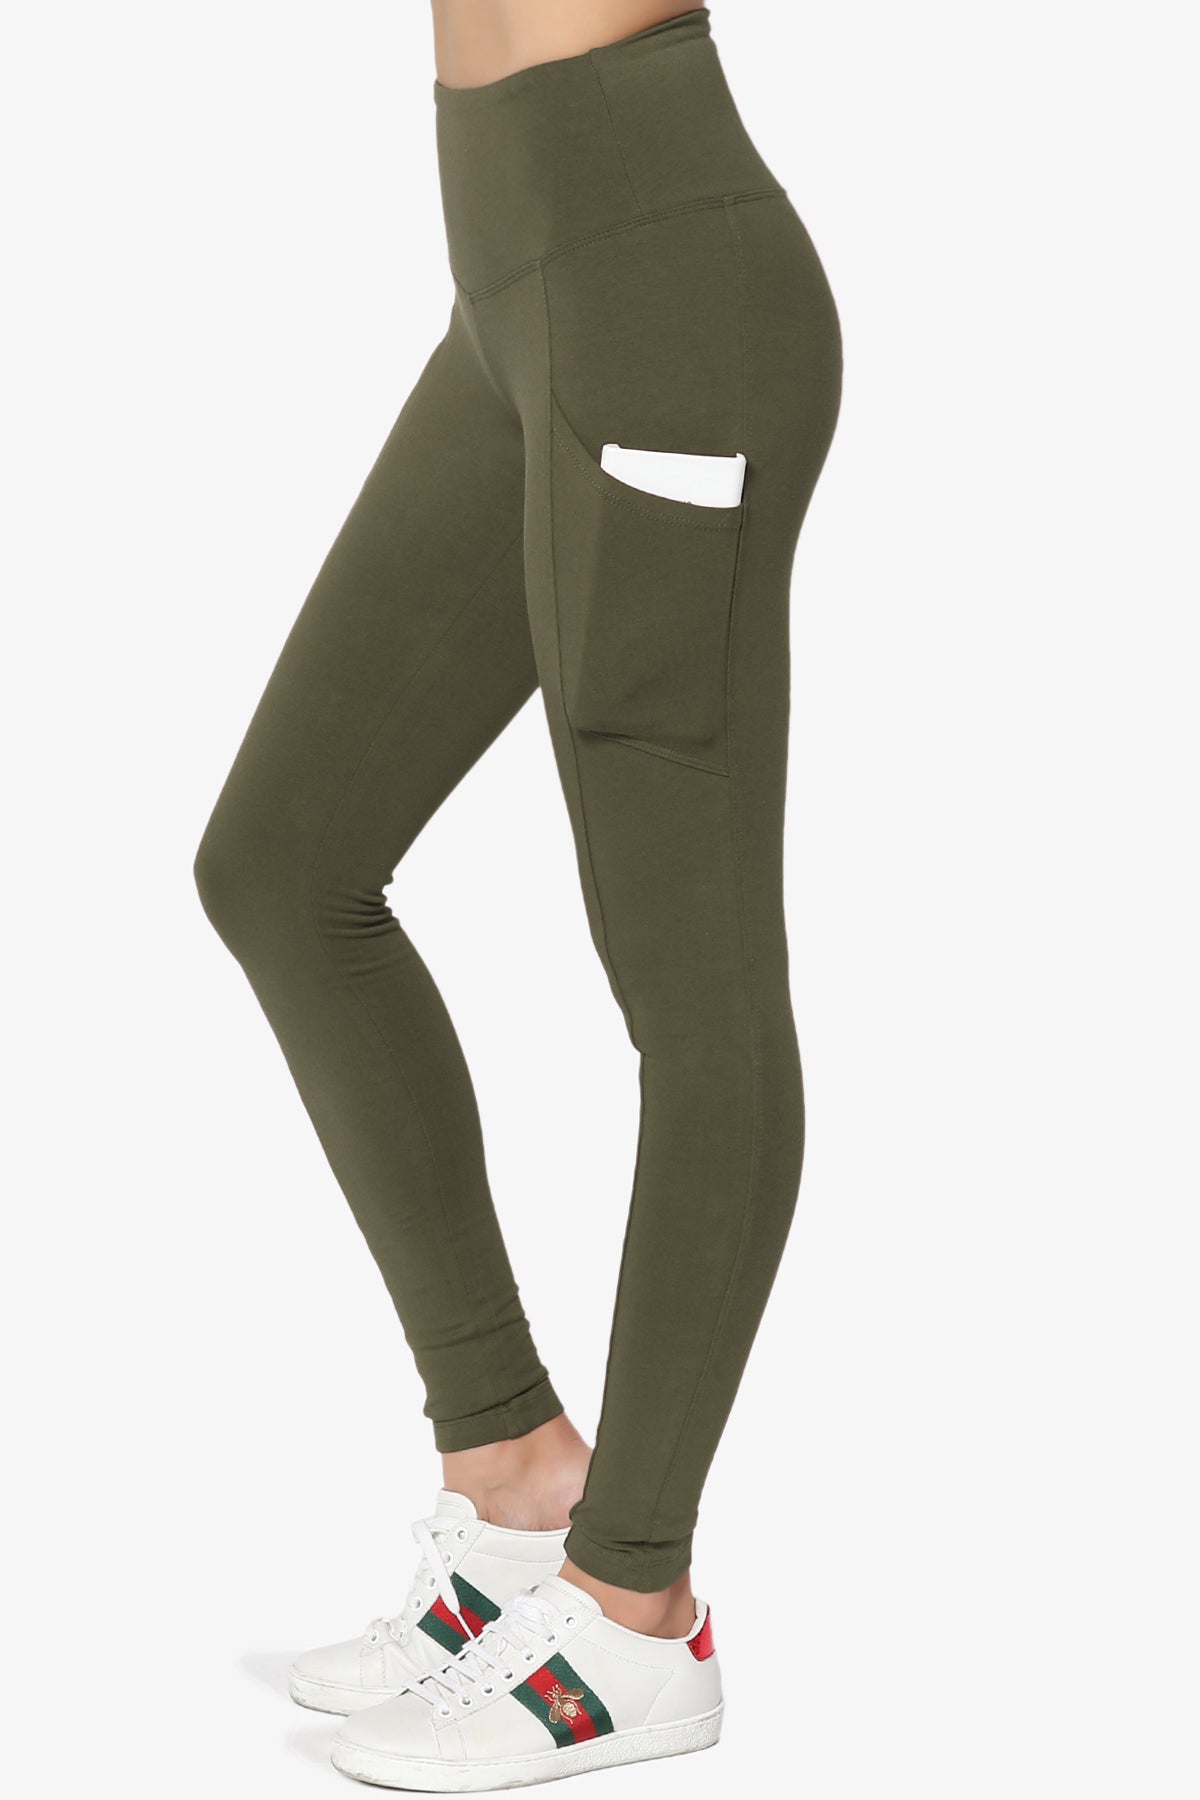 Ansley Luxe Cotton Leggings with Pockets OLIVE_1